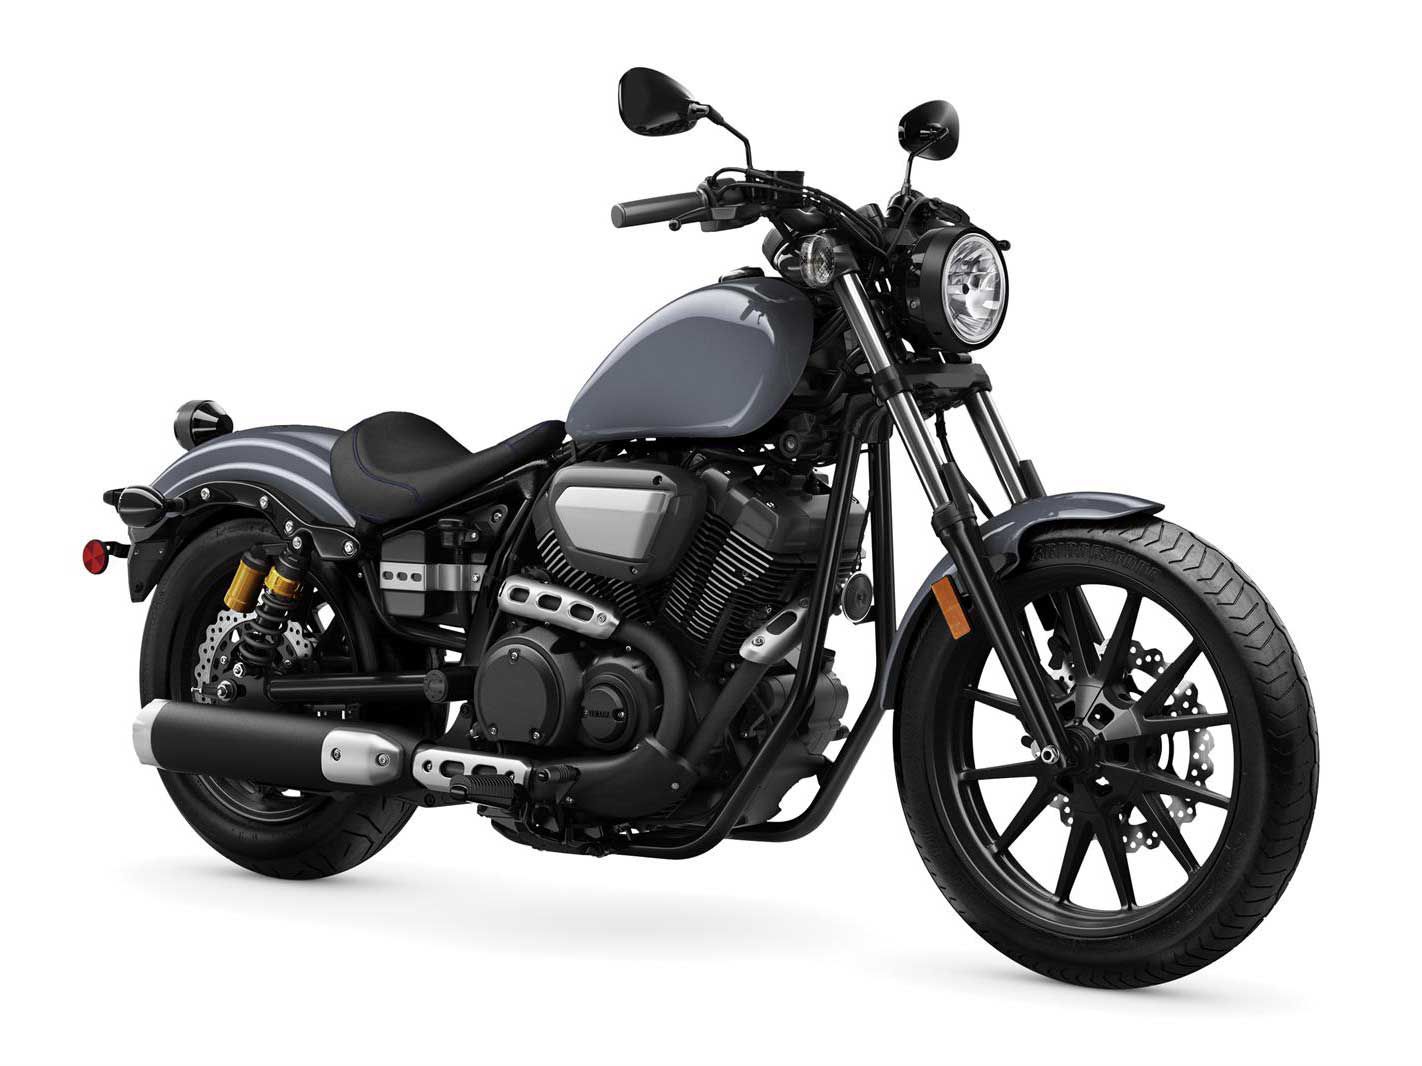 This cruiser is a light drinker—the Yamaha Bolt tops the 750–1,000cc Cruiser MPG category.